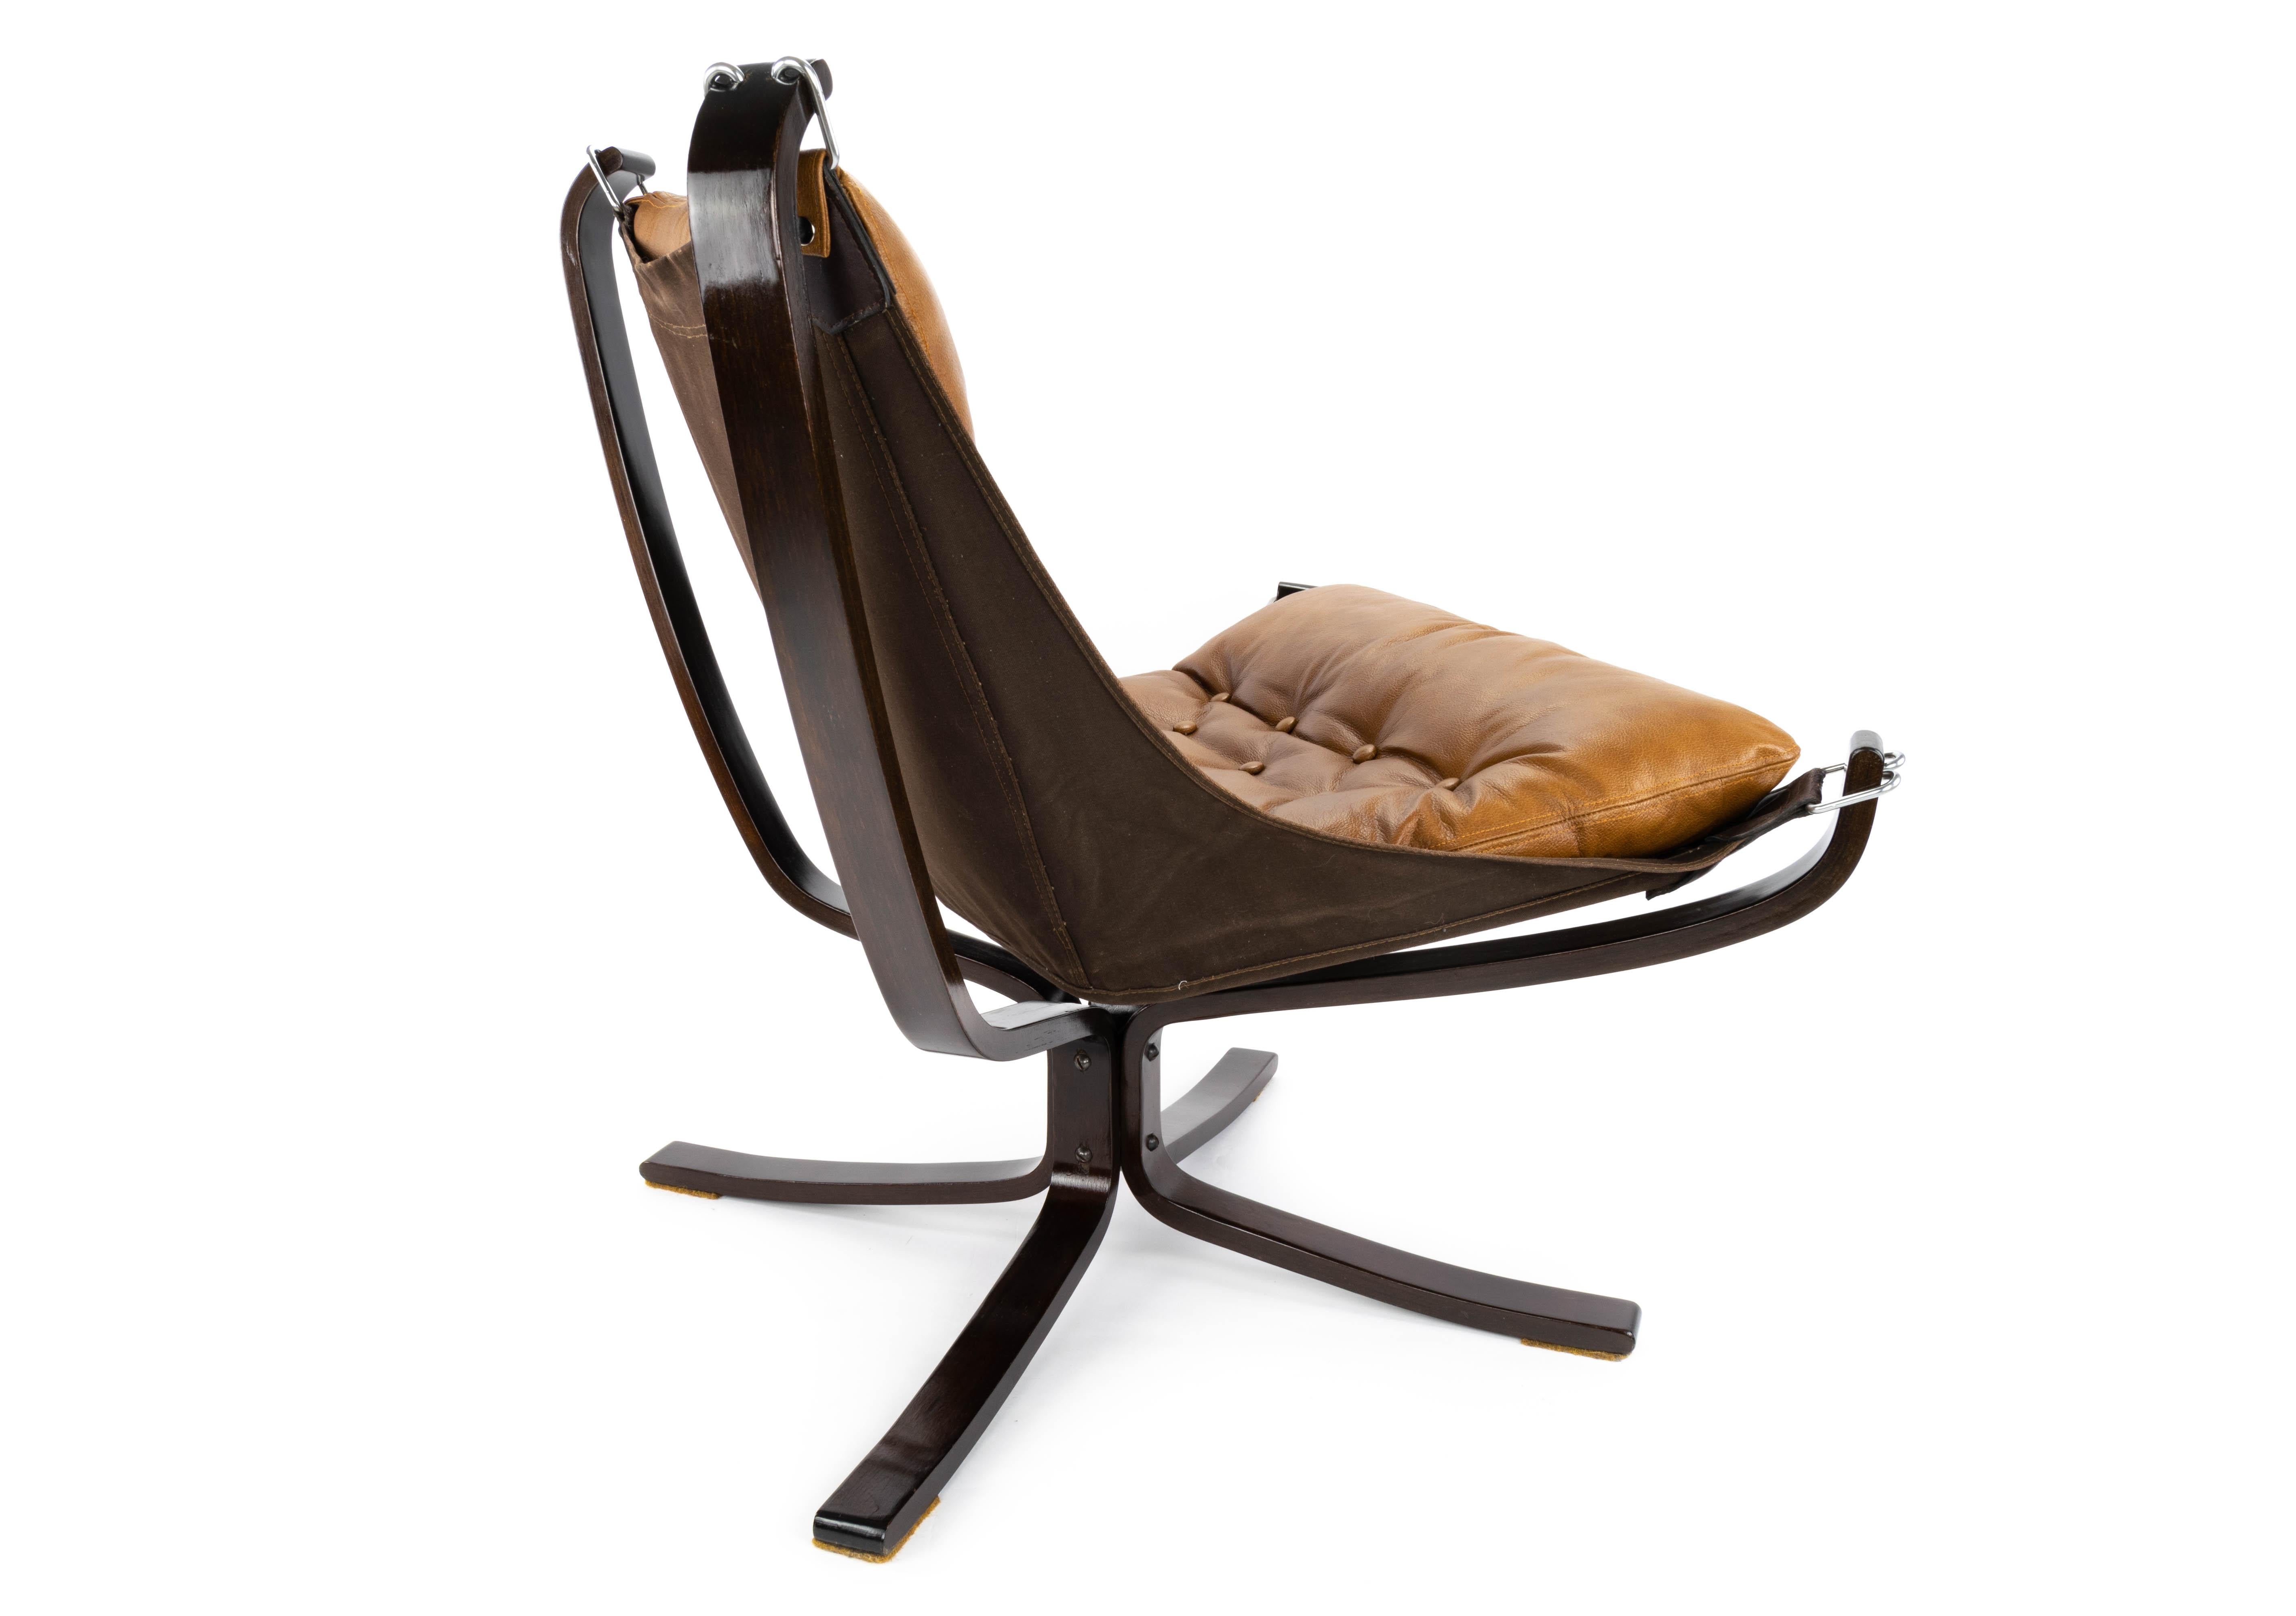 Late 20th Century Cognac Leather Falcon Longe Chair by Sigurd Ressell for Vatne Möbler Norway 1970